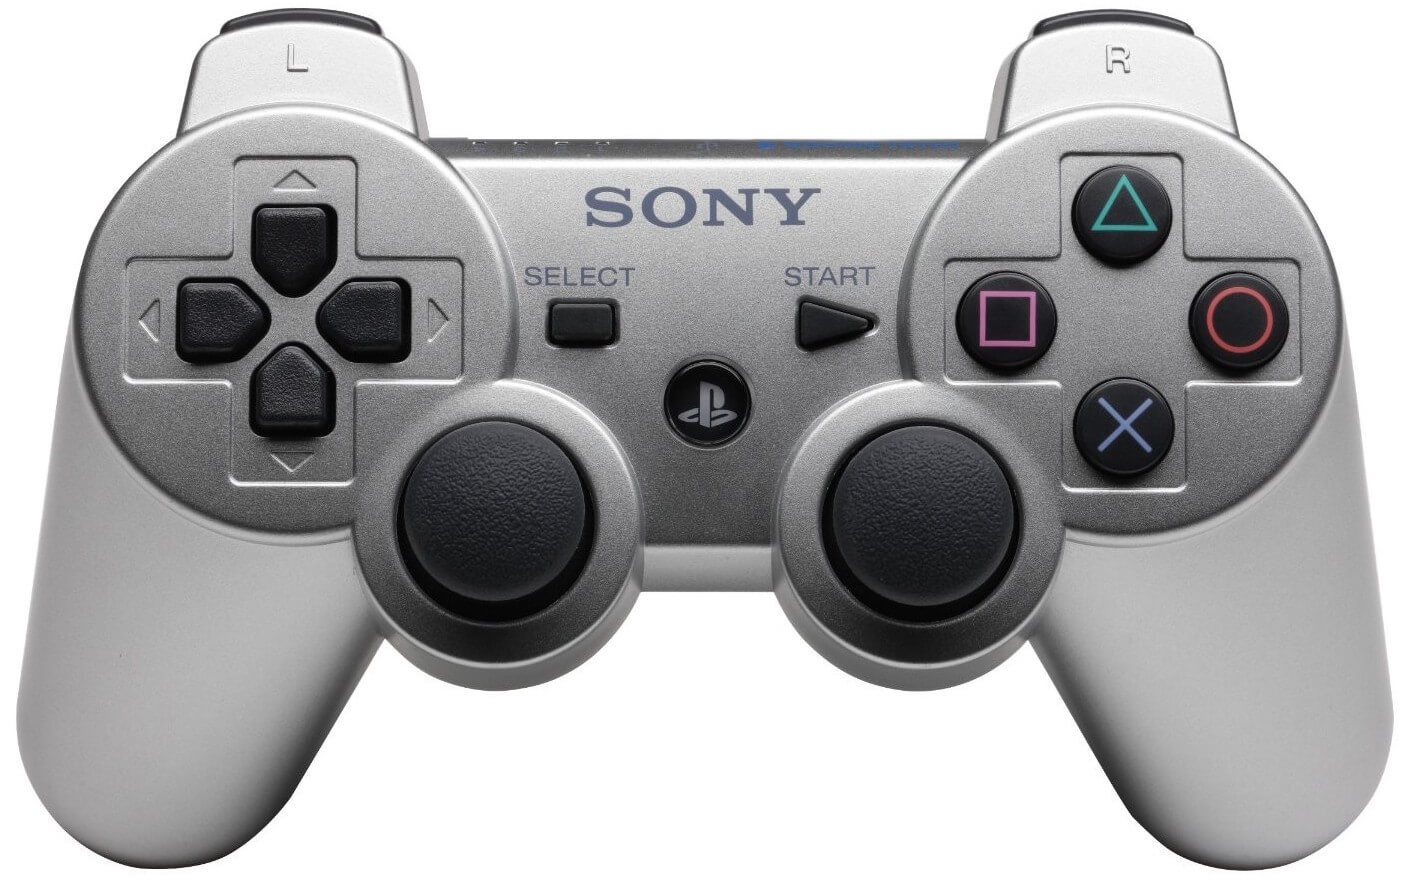 Sony Dual Shock Playstation 3 Controller - Silver | levelseven